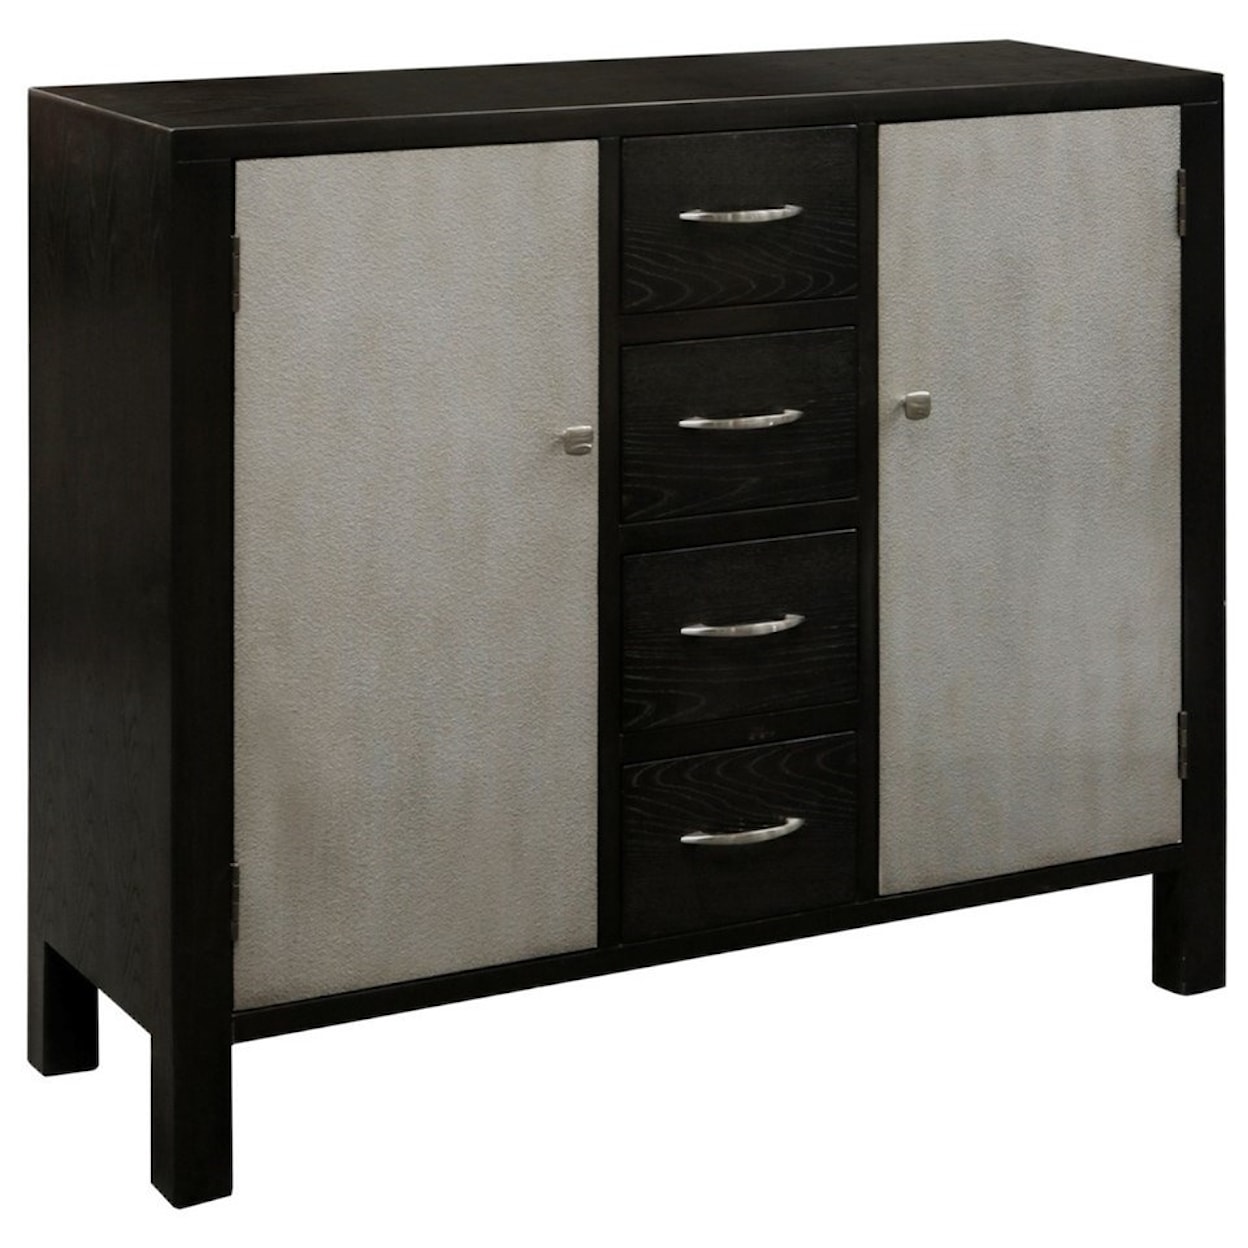 StyleCraft Occasional Cabinets 4 Drawer Cabinet with Metallic Silver Doors